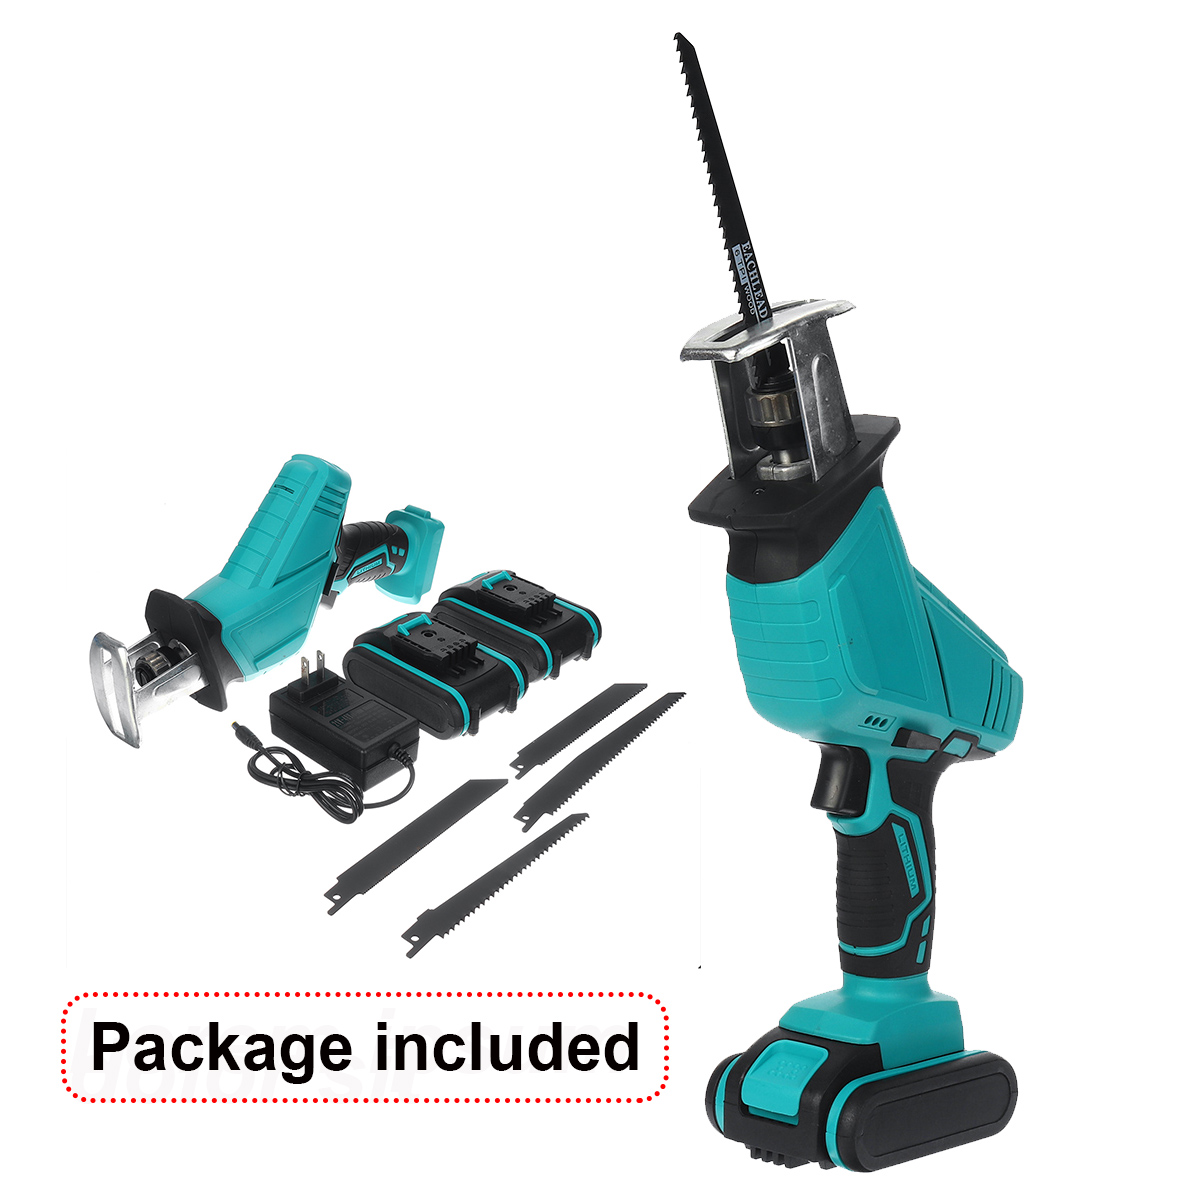 3000rpm-4000mAh-Electric-Saw-Cordless-Rechargeable-Handheld-Reciprocating-Saw-Wood-Cutter-W-4pcs-Saw-1758398-4